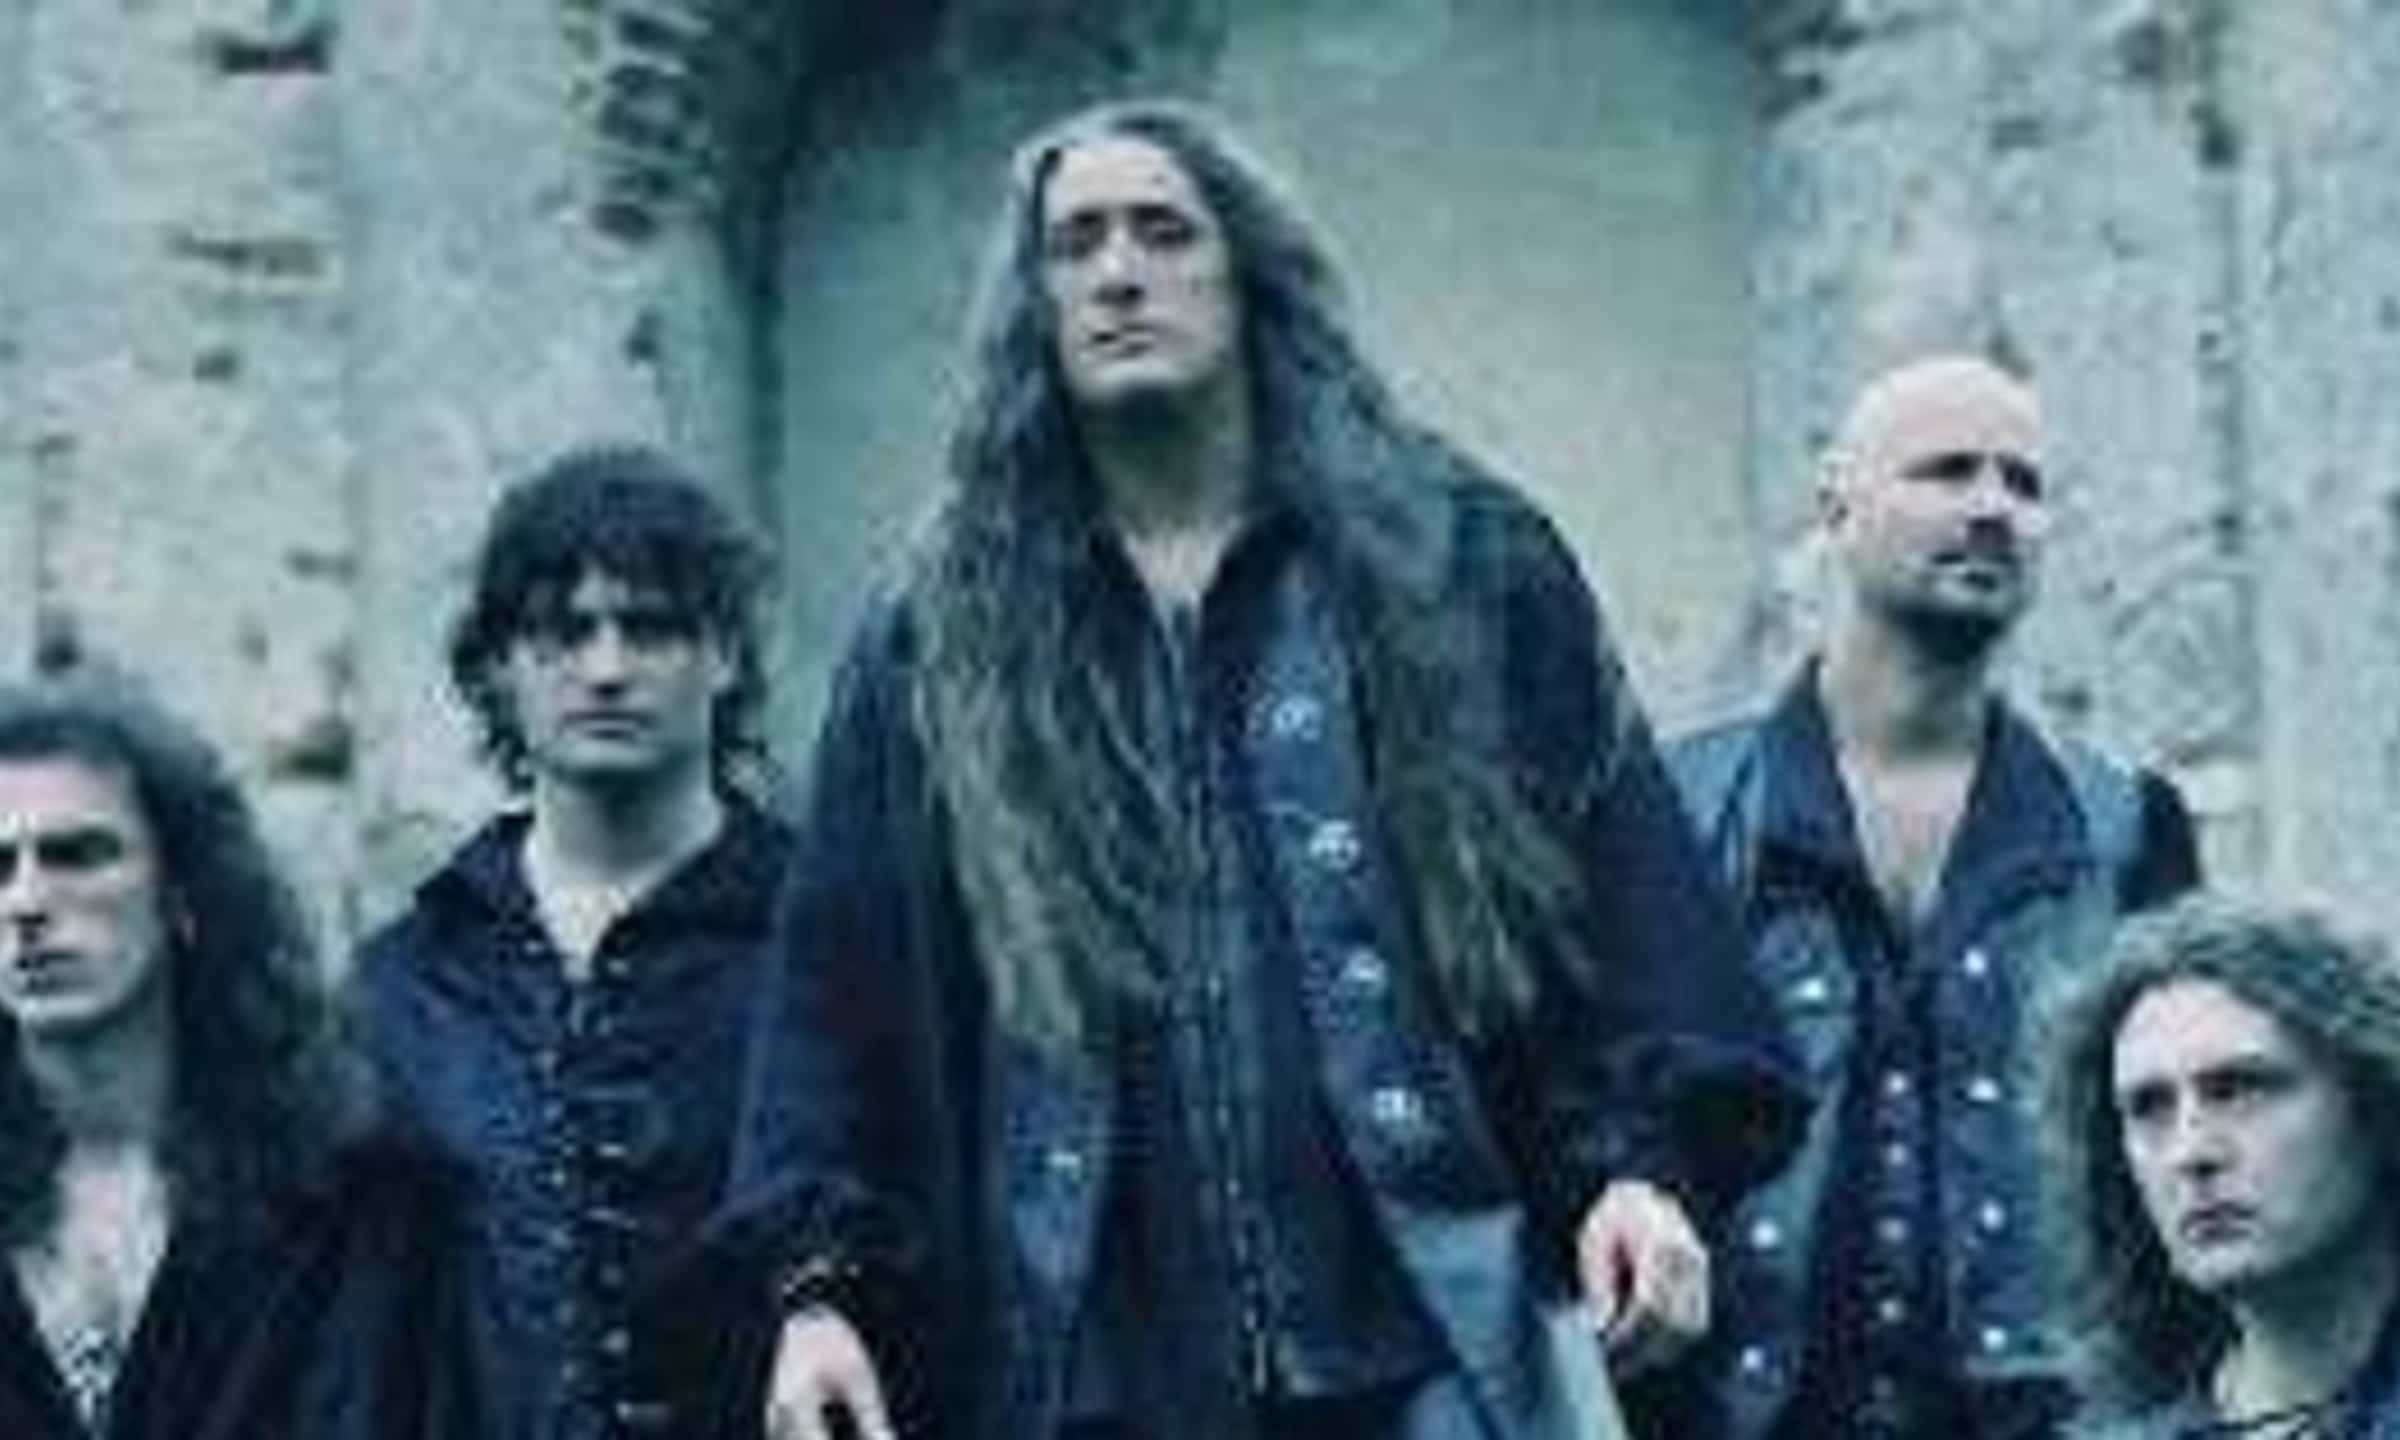 List Of All Top Rhapsody Of Fire Albums, Ranked